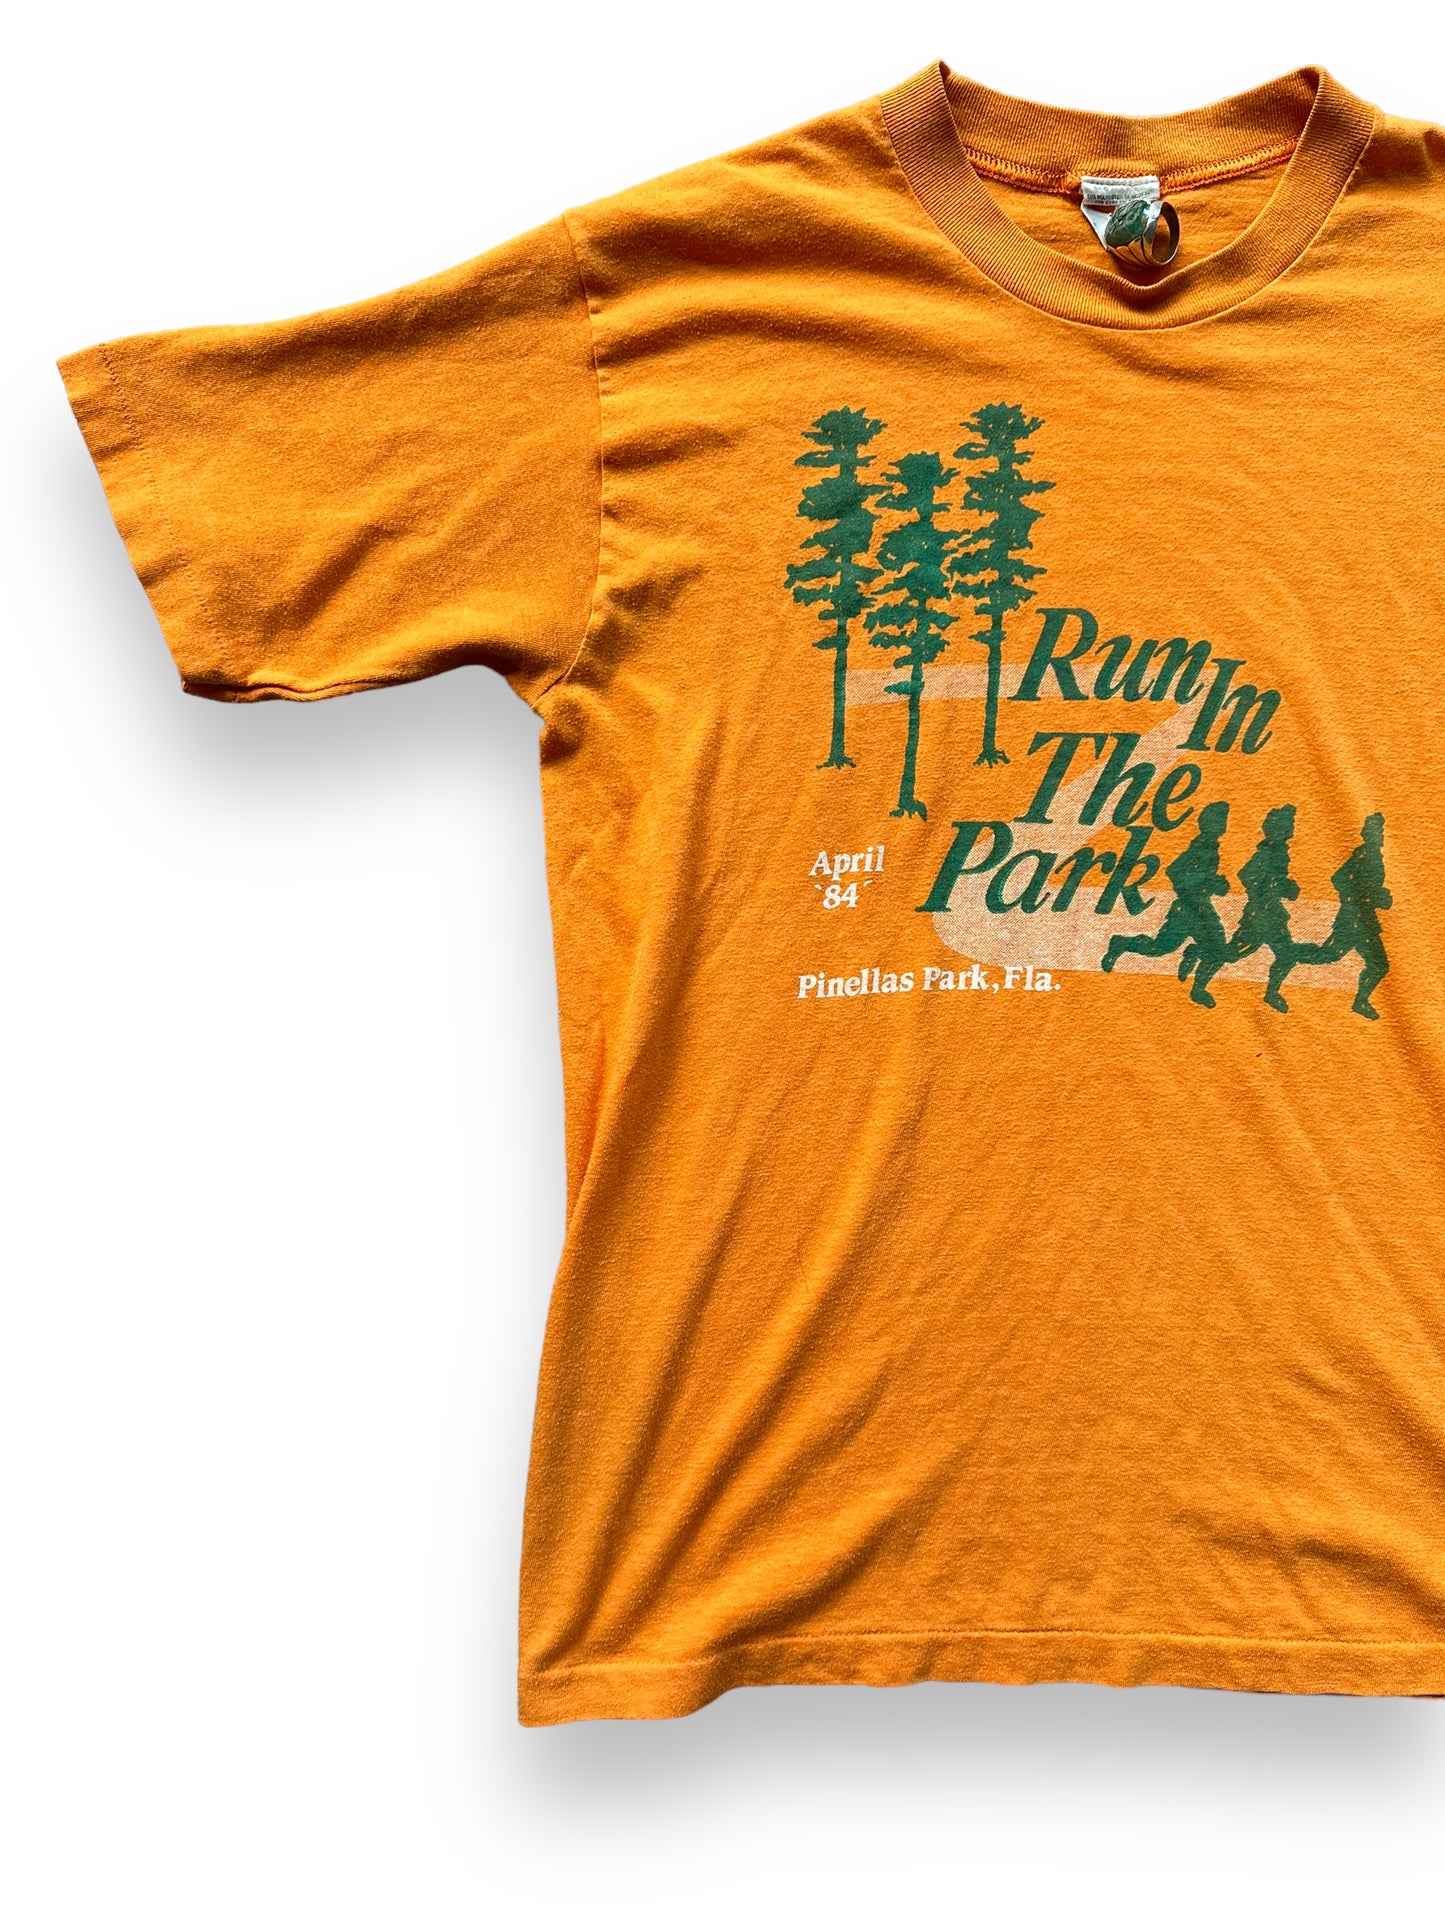 Front Right View of 1984 Run in the Park Tee SZ L | Vintage Graphic T-Shirts Seattle | Barn Owl Vintage Tees Seattle